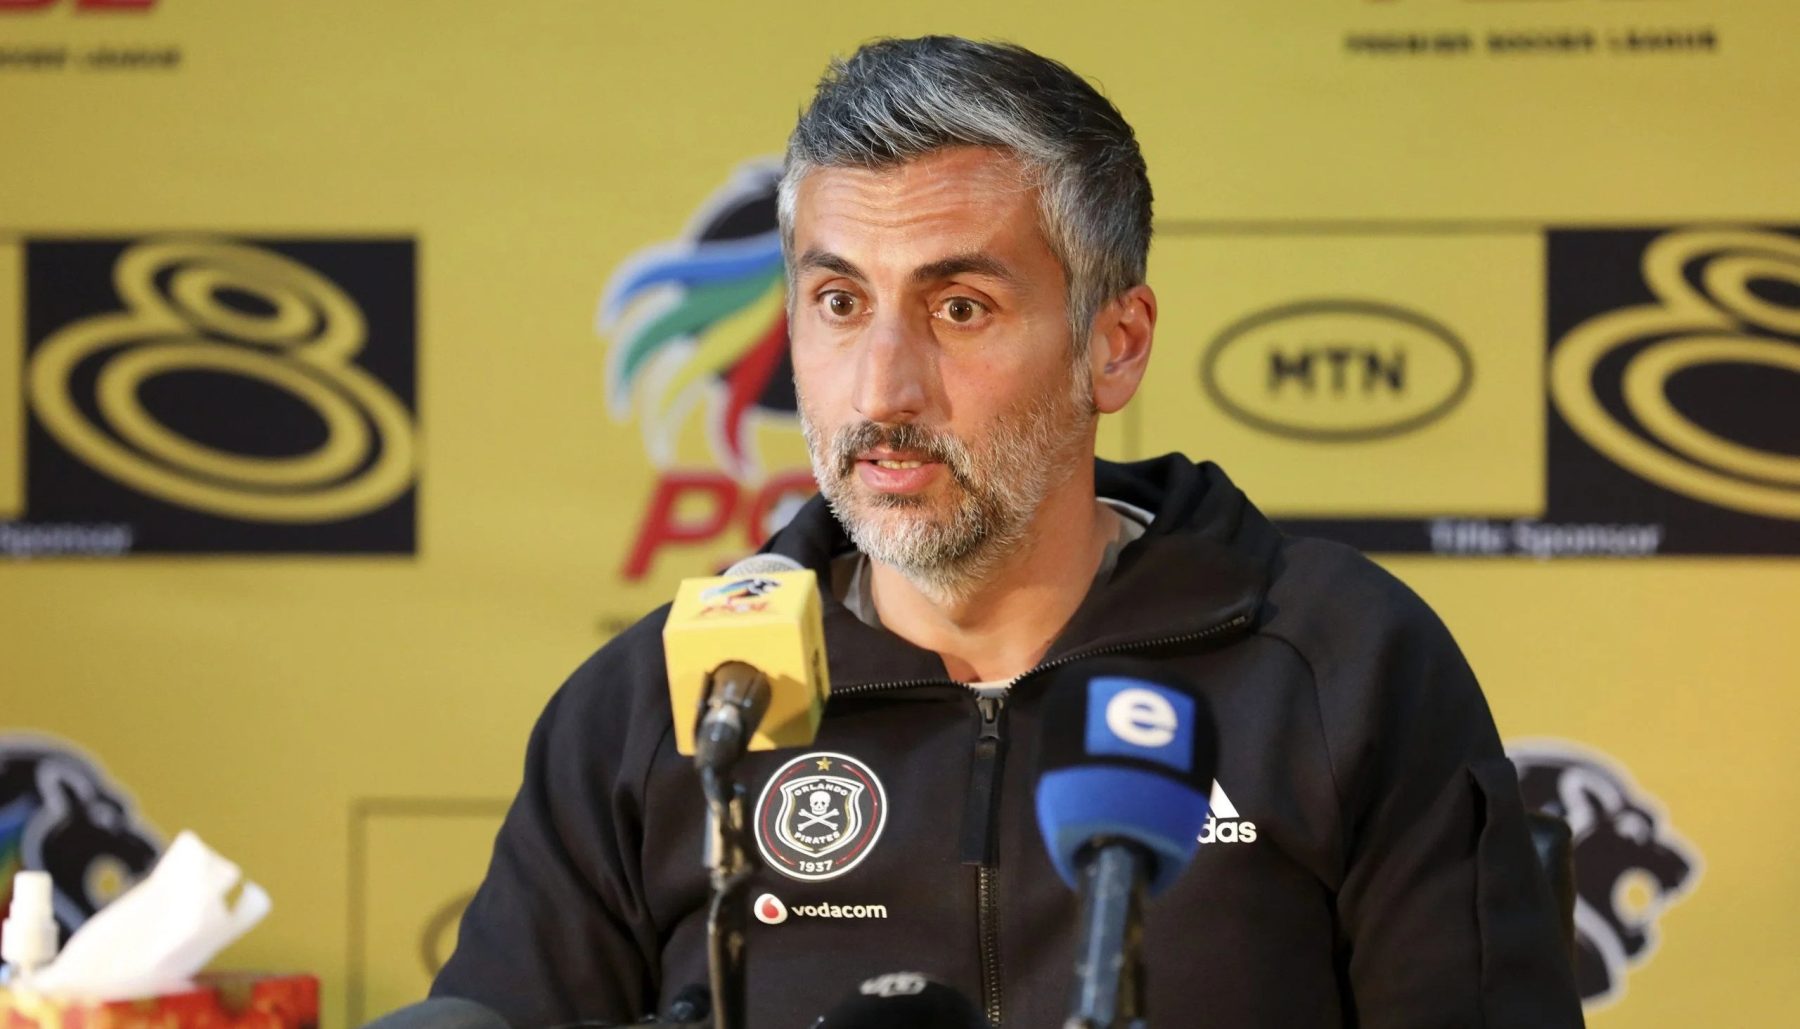 'Are you sure they're criticising me?': Riveiro on Pirates fans